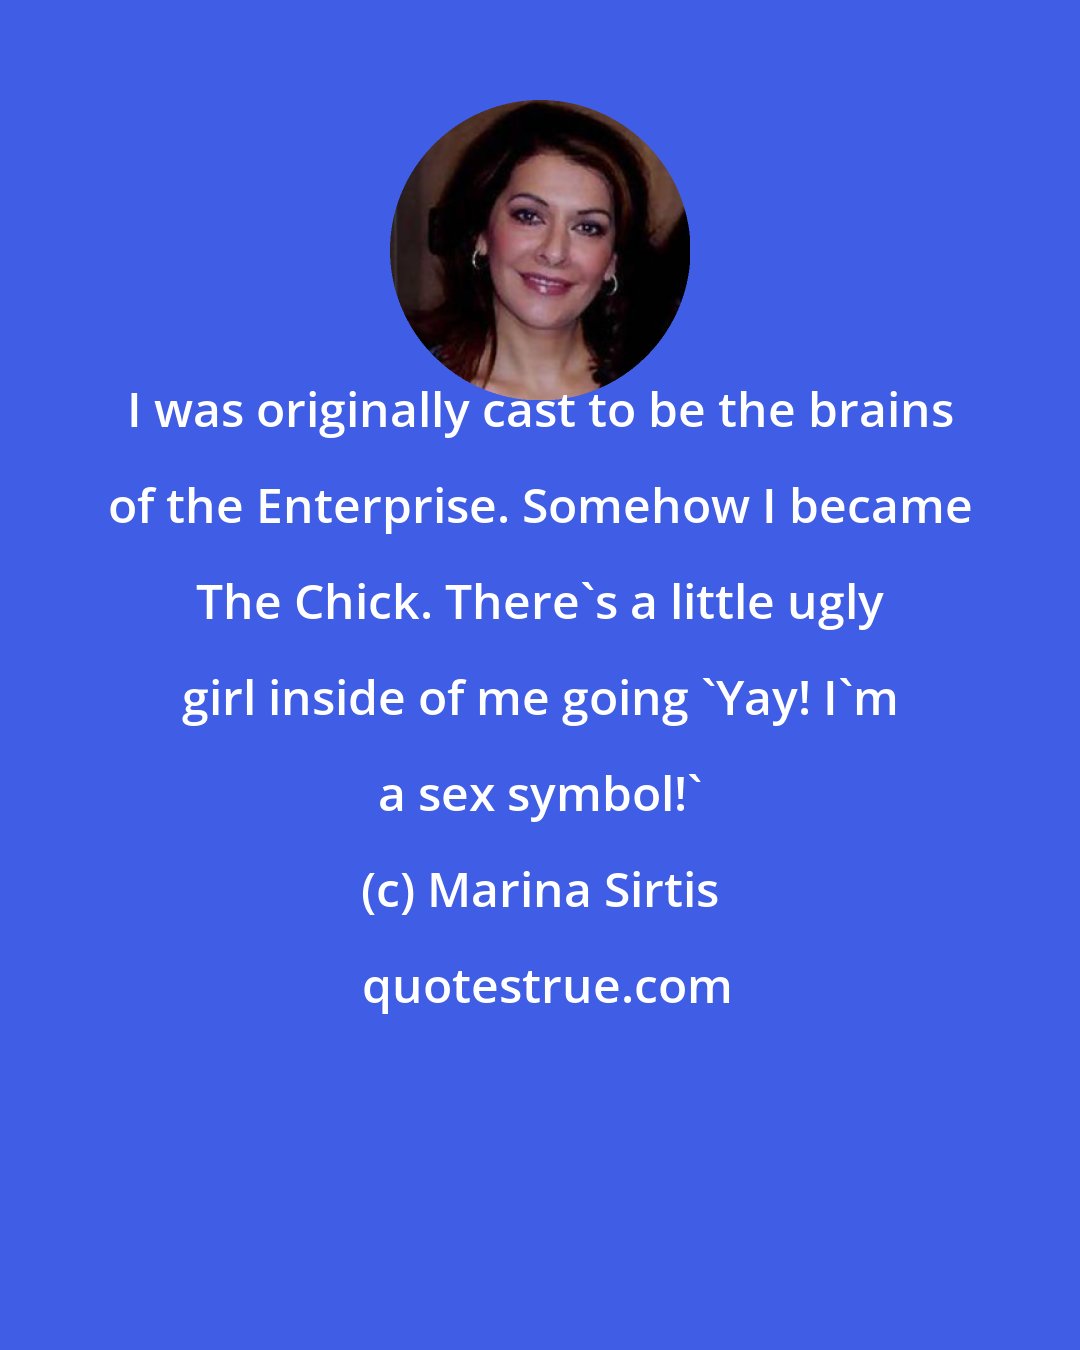 Marina Sirtis: I was originally cast to be the brains of the Enterprise. Somehow I became The Chick. There's a little ugly girl inside of me going 'Yay! I'm a sex symbol!'